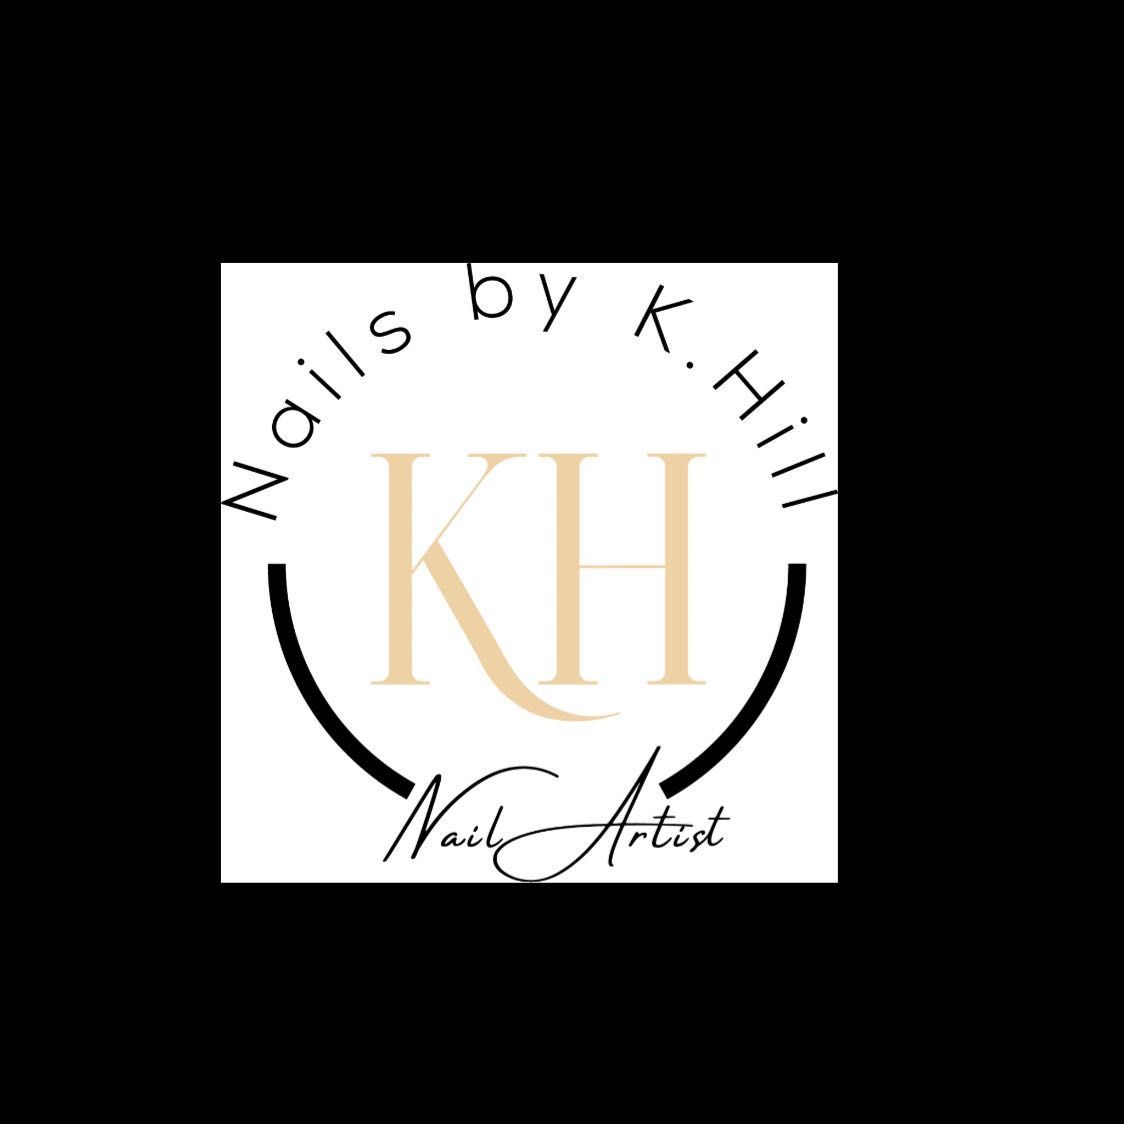 Nails By K. Hill, Address Given Upon Booking, Chicago, 60602